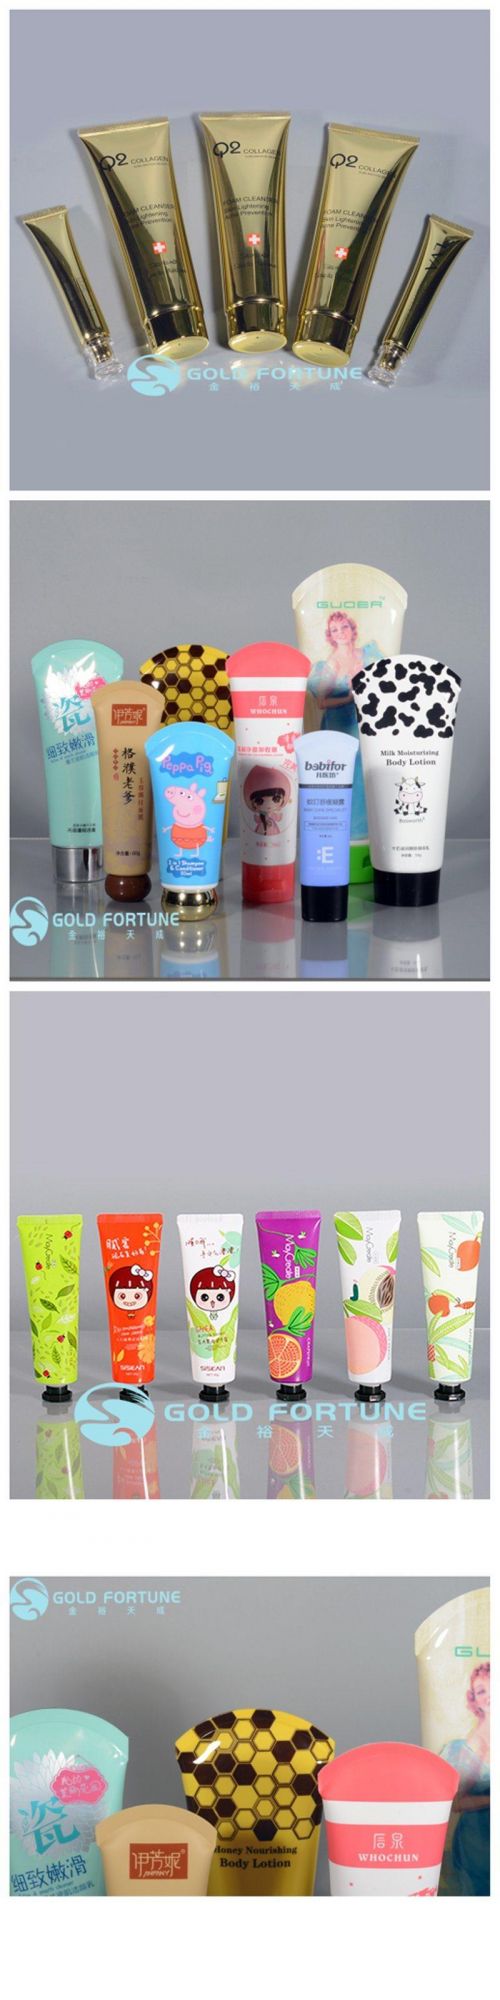 Toothpaste Soft Cream Plastic Tube Package